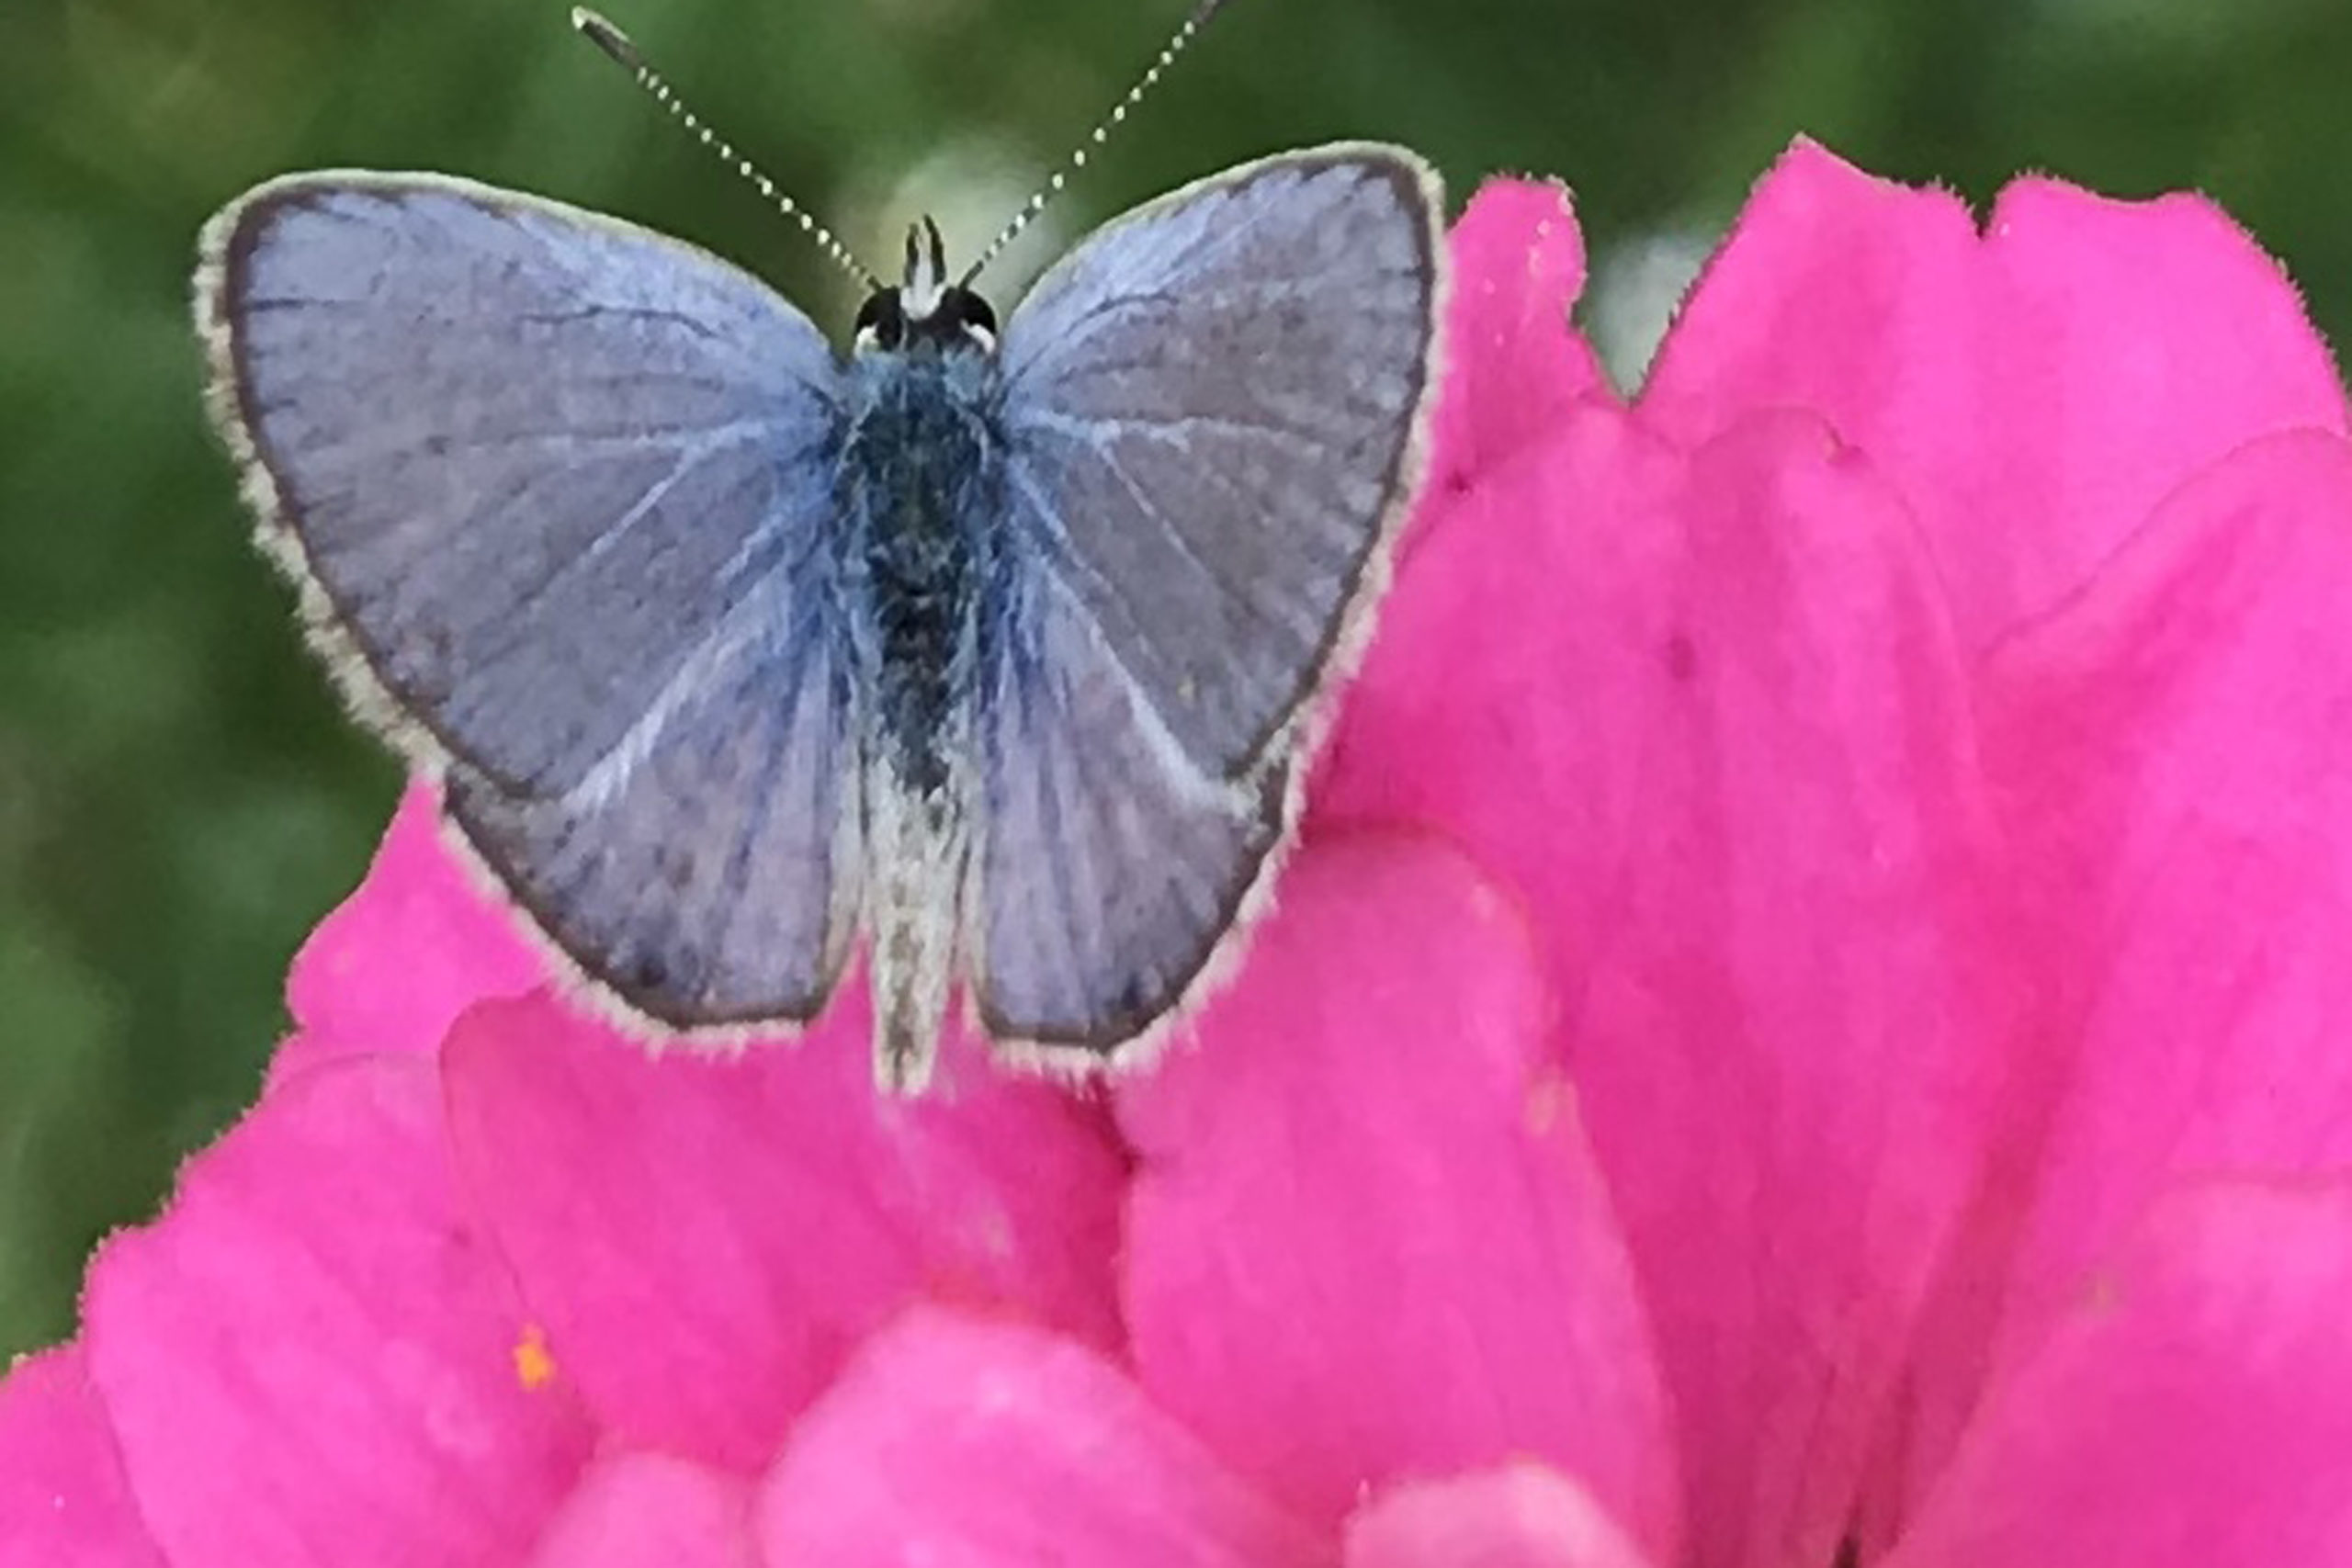 Using iNaturalist to id new butterfly LB